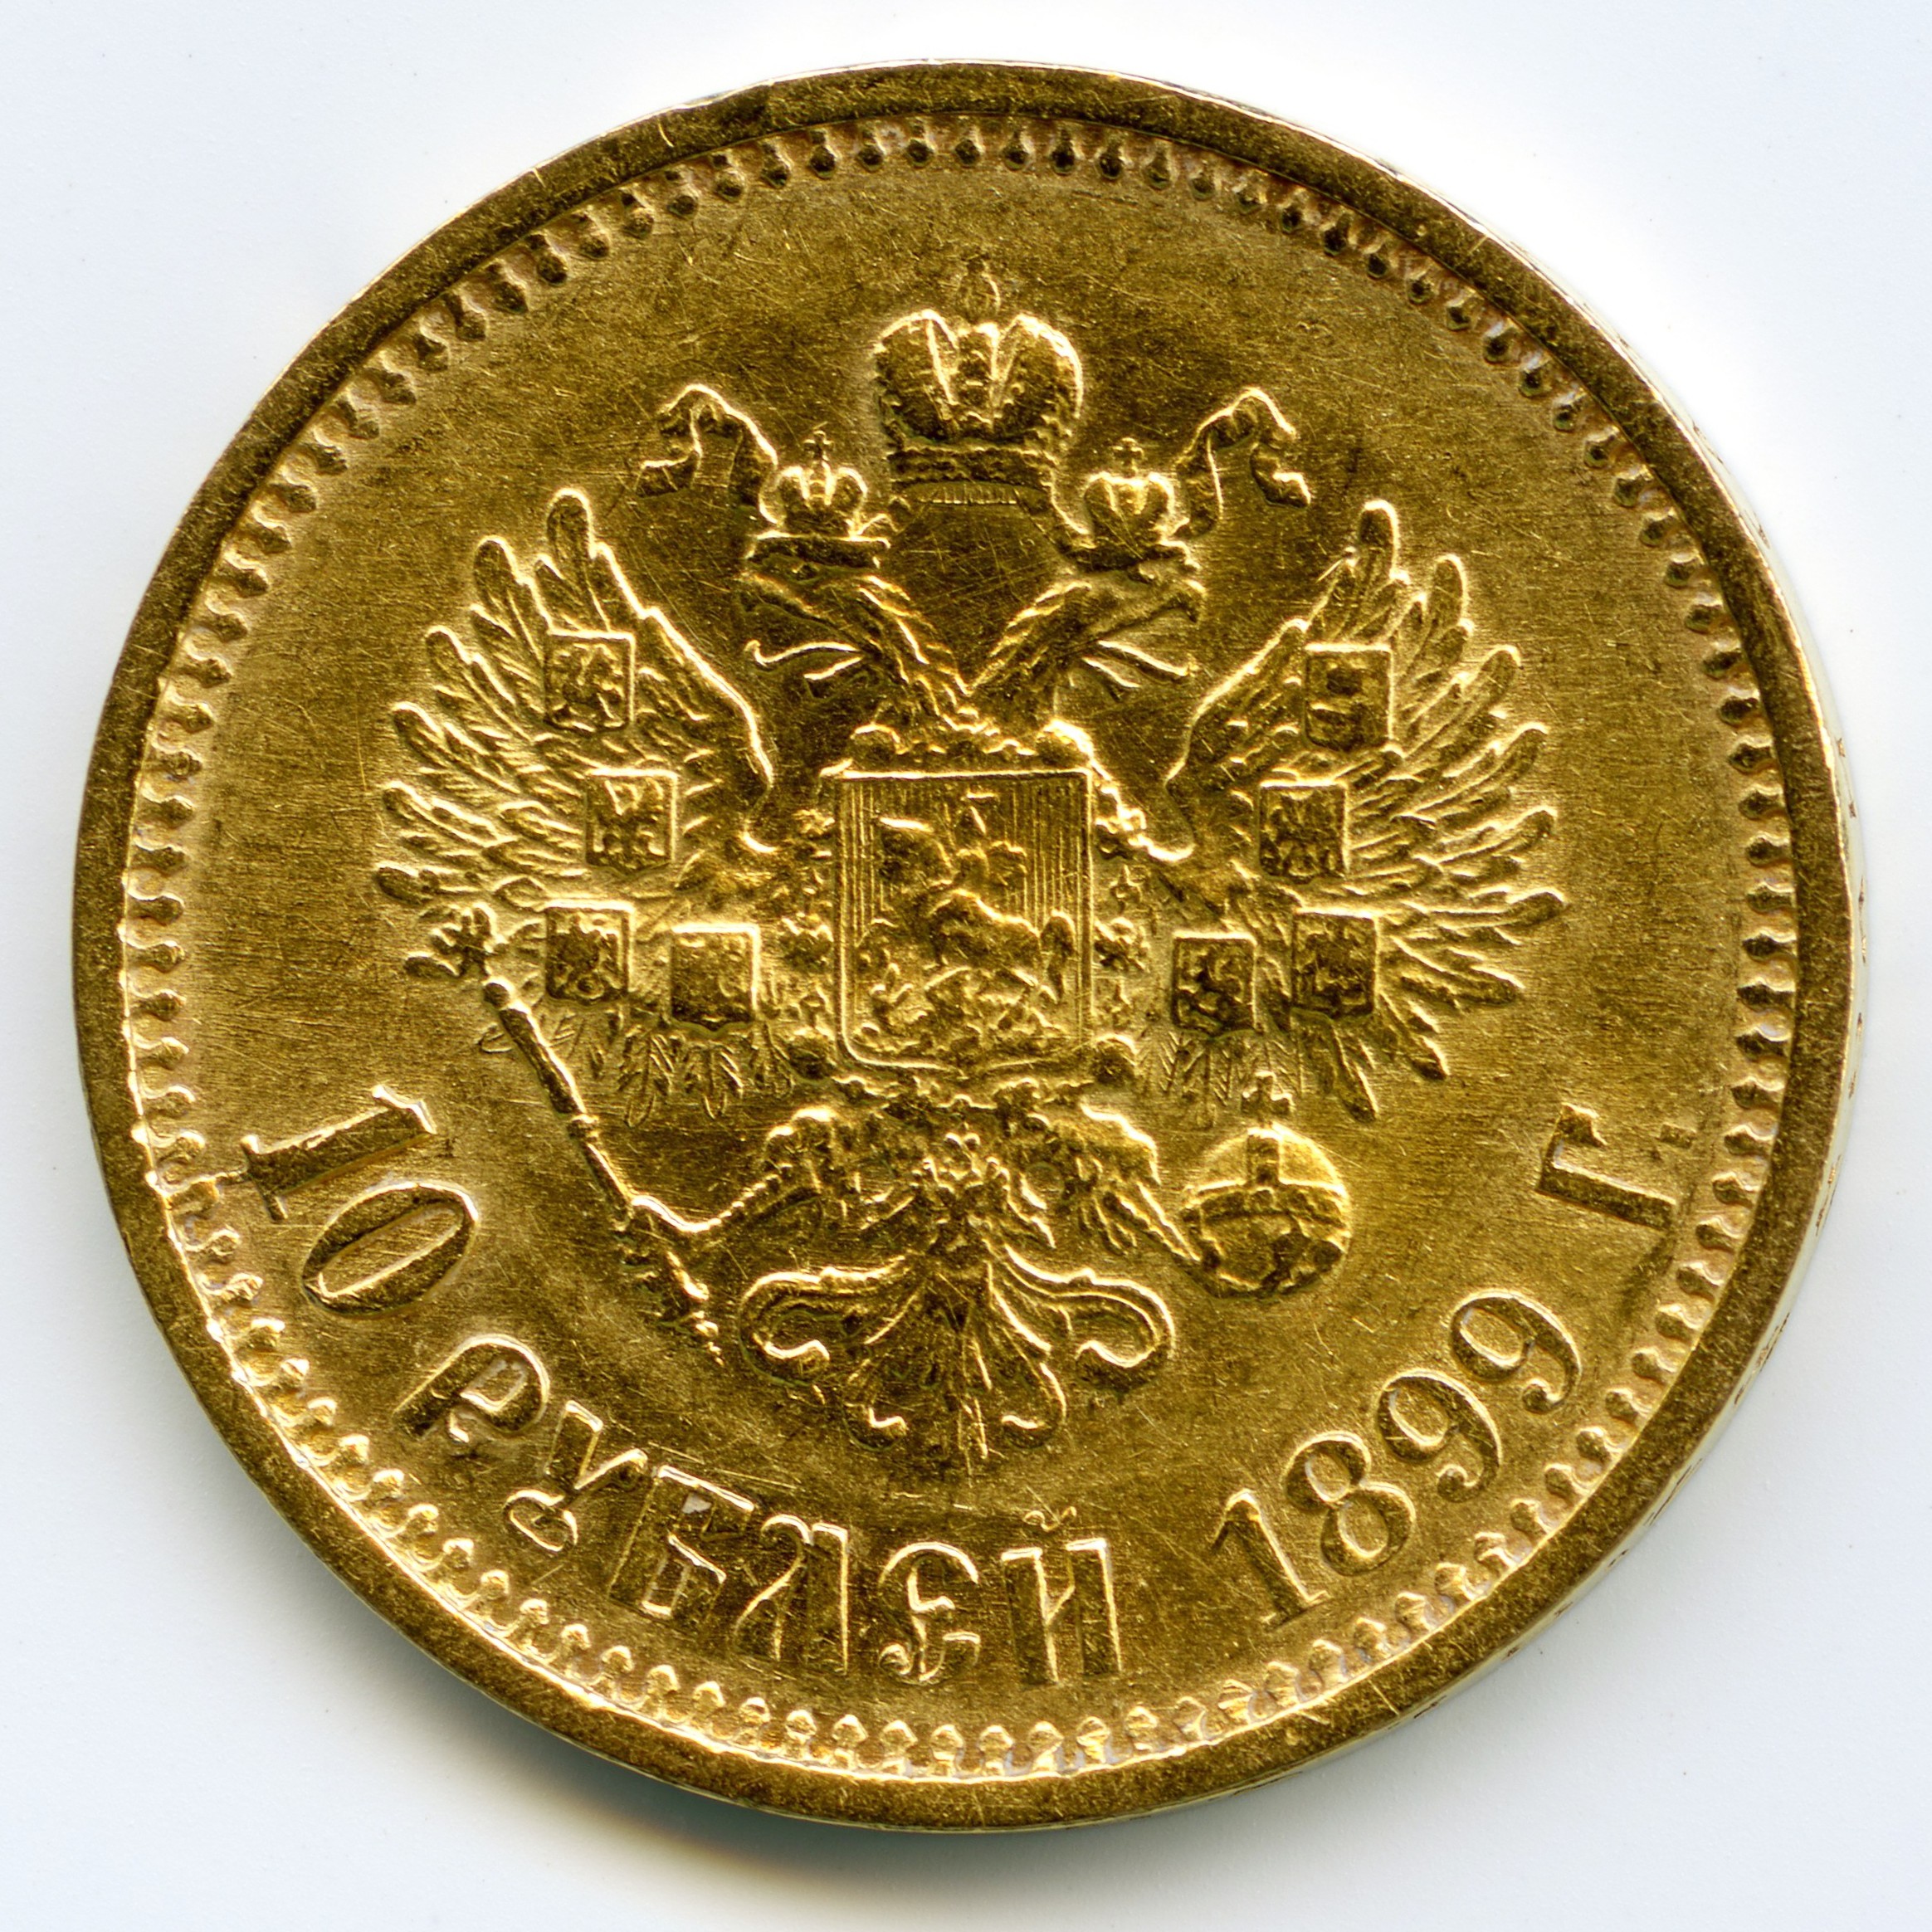 Russie - 10 Roubles - 1899 revers